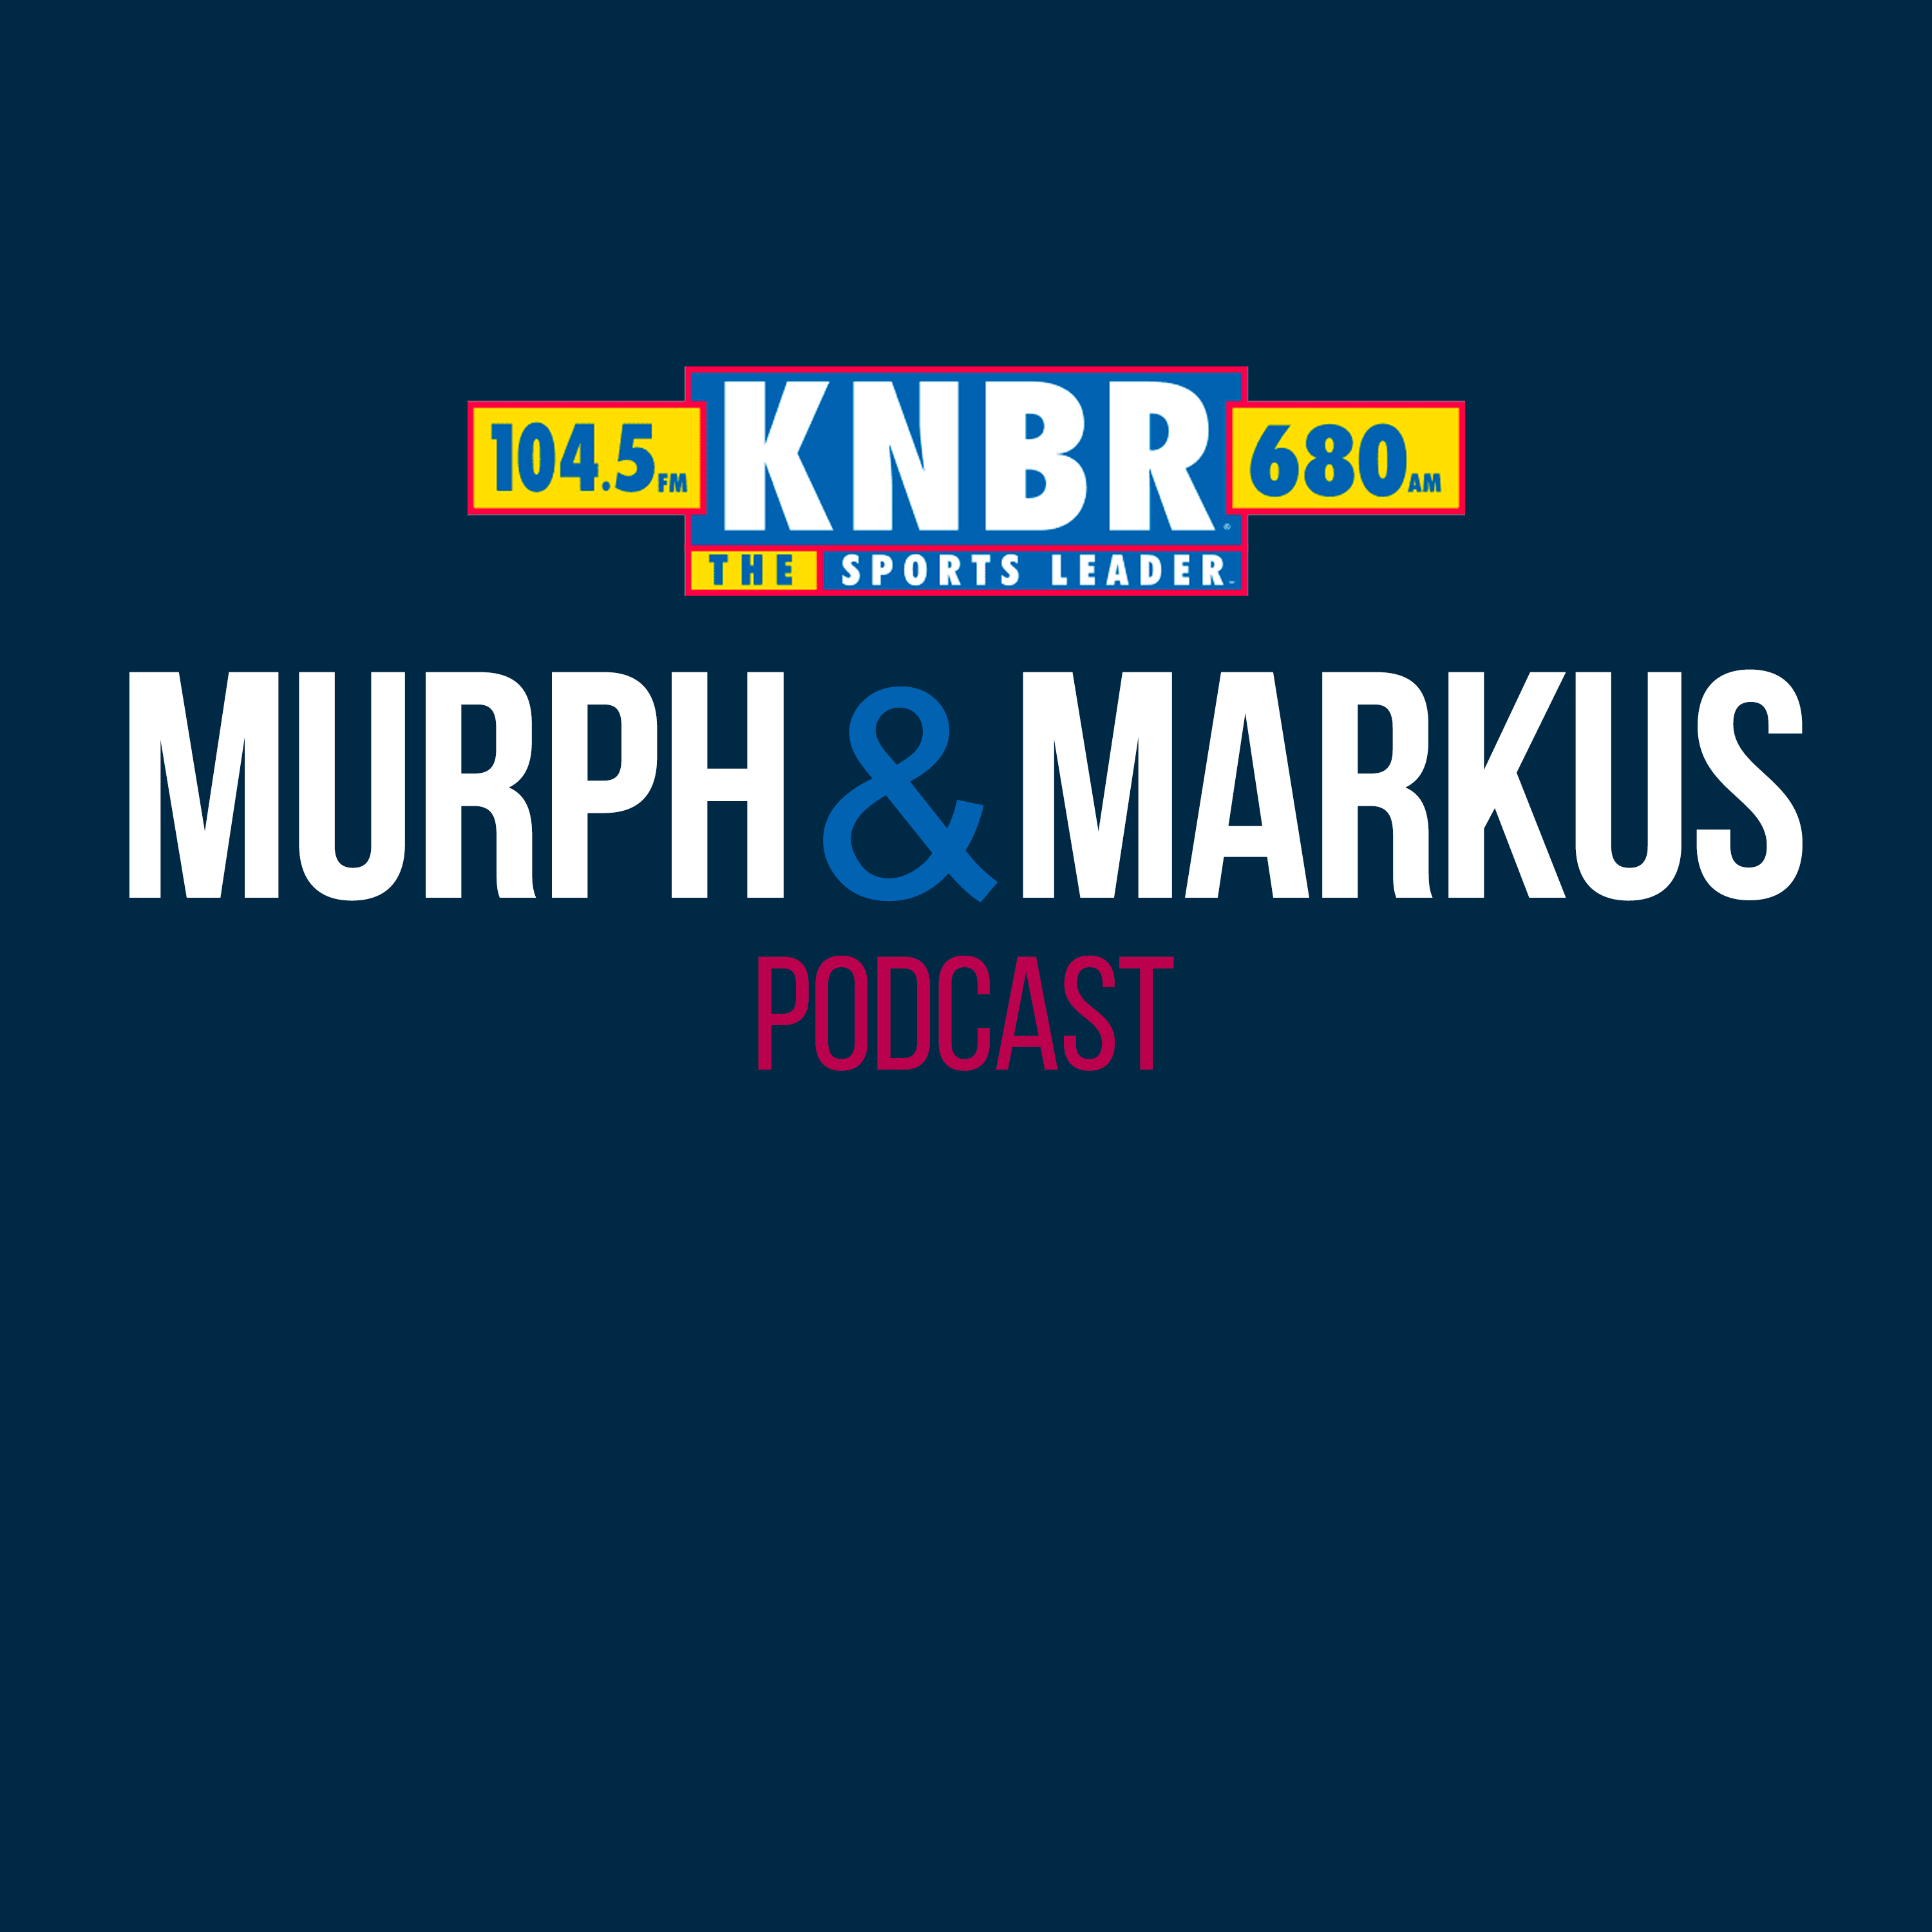 8-2 Hour 2: Murph & Markus share their thoughts on the lack of 49ers players practicing due to injuries/rest, talk to Mike Krukow, and get into today's top story in the Big Hit